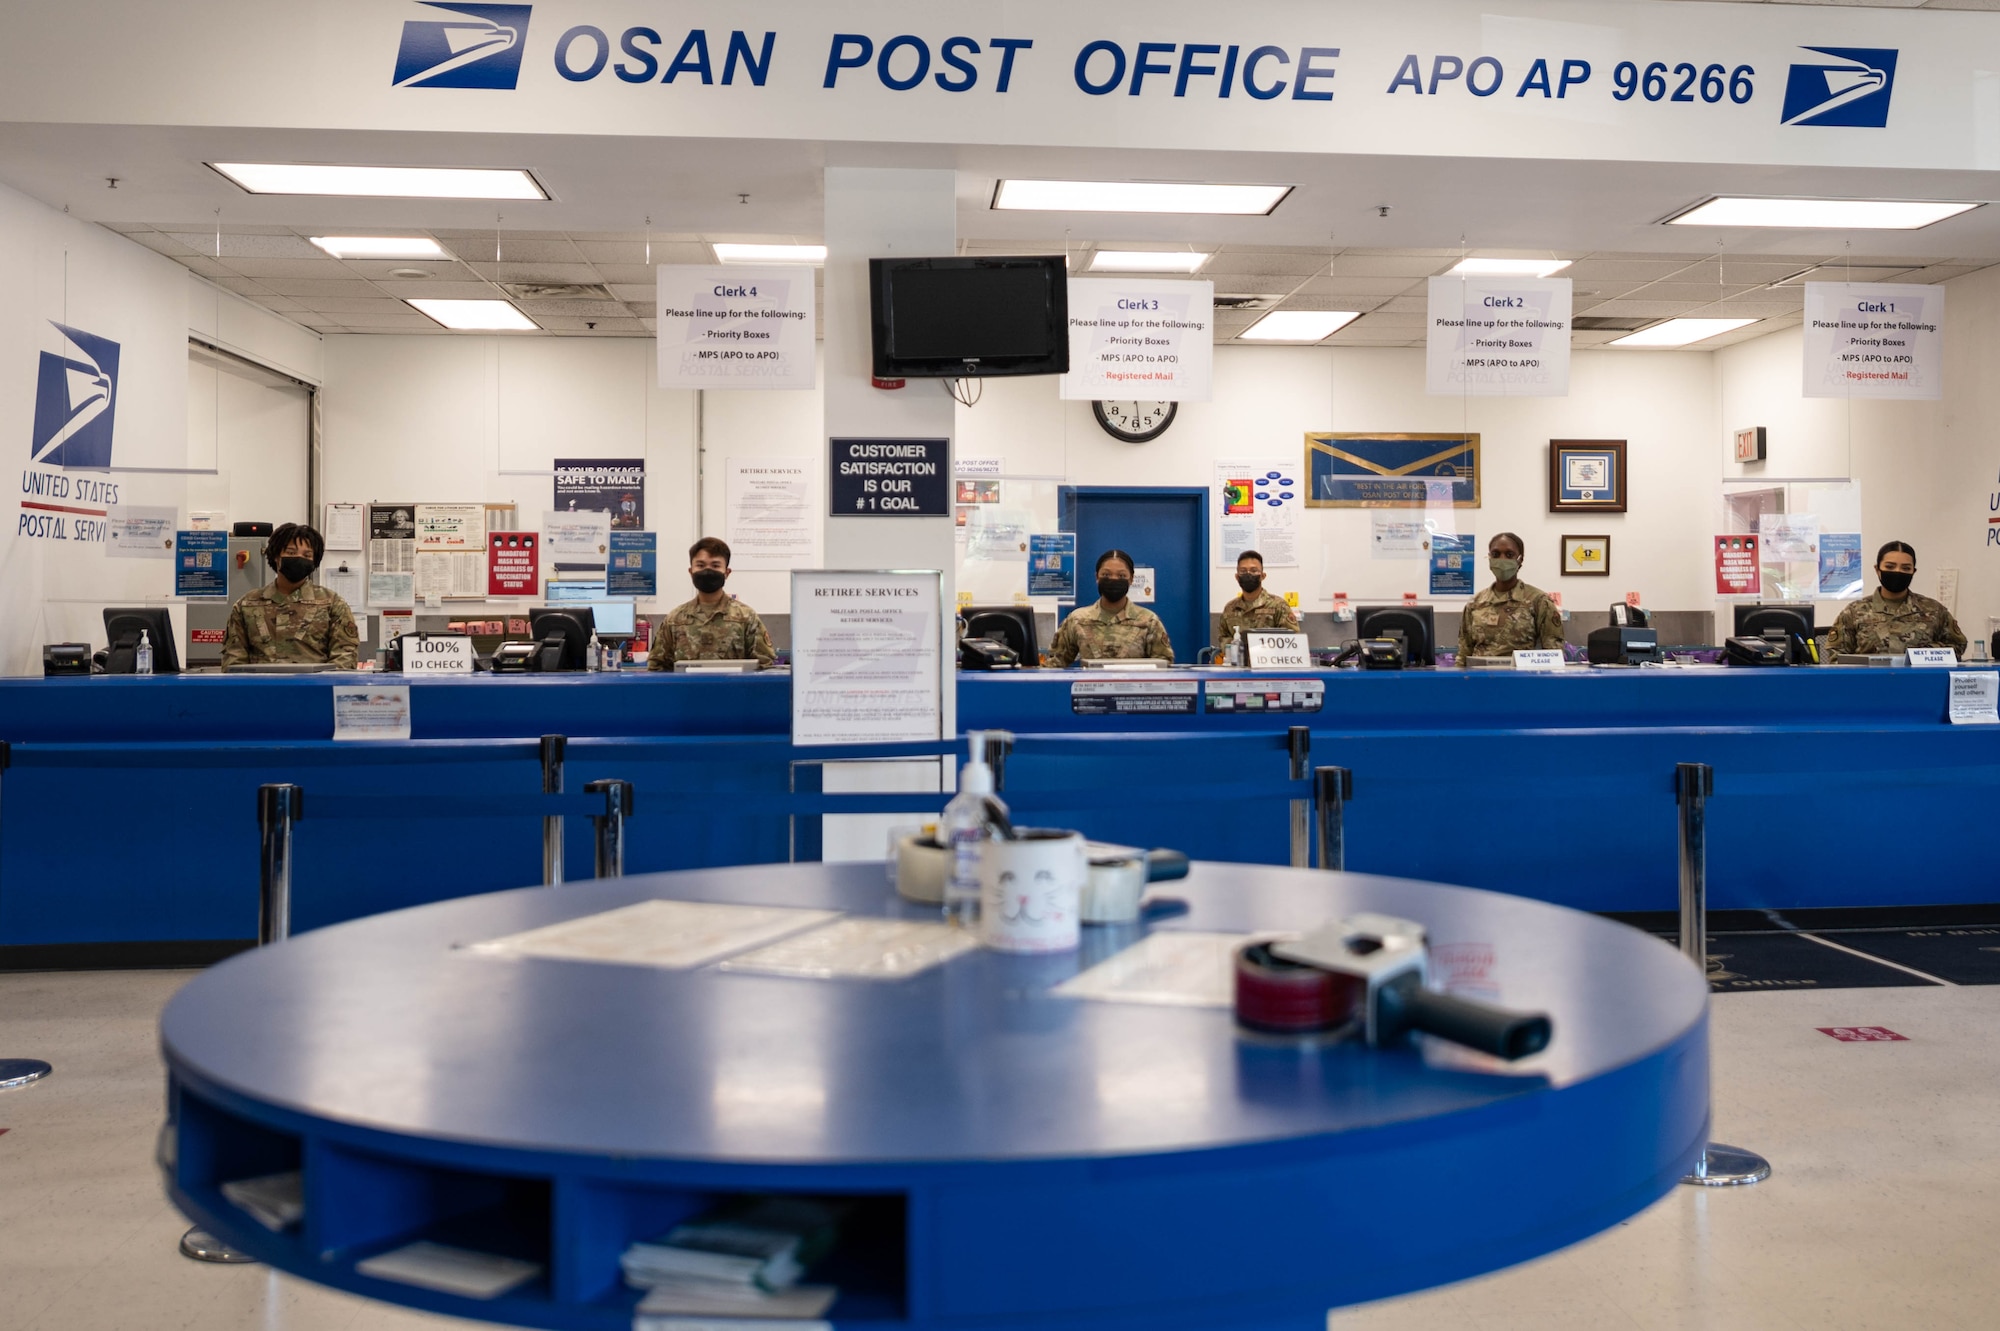 Osan Post Office implements paperless system > Osan Air Base > Article